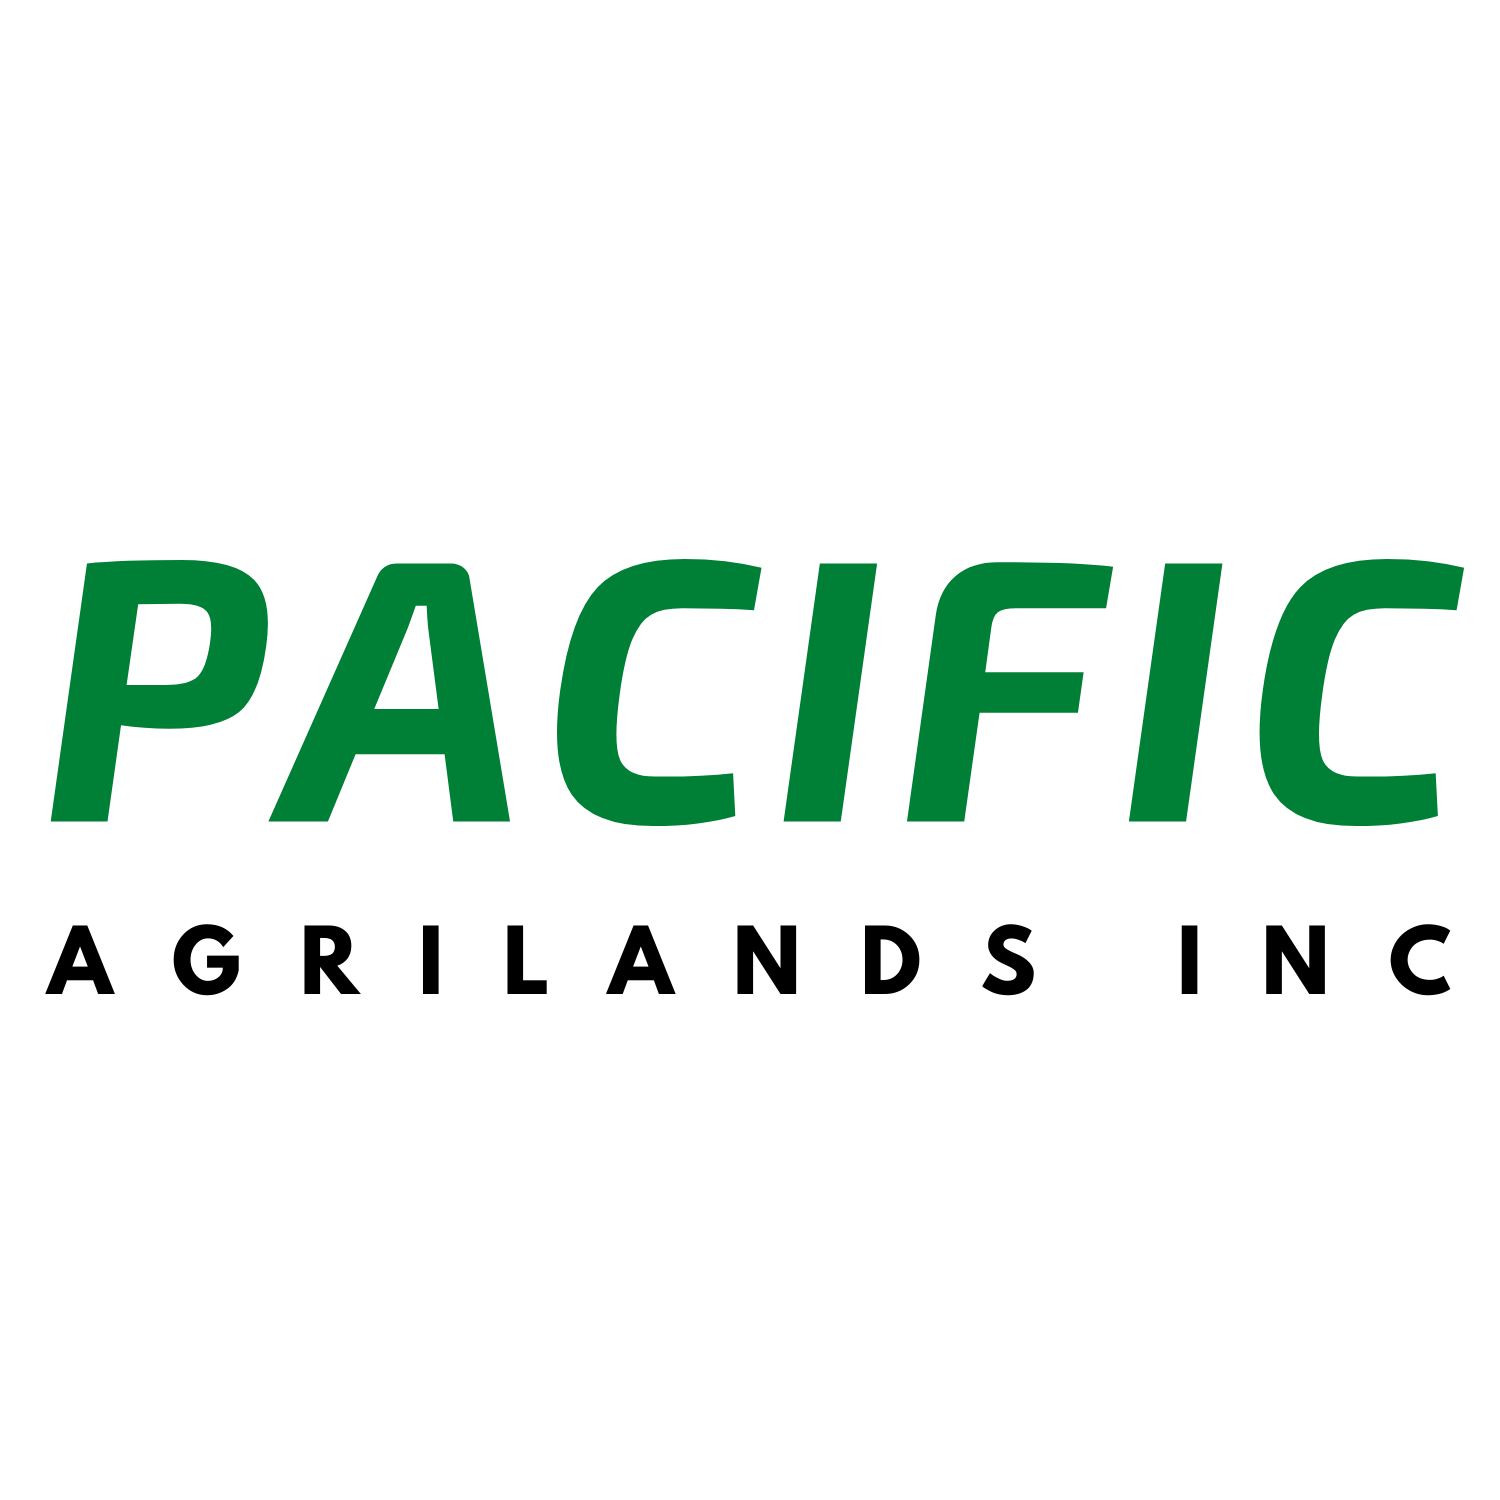 Pacific Agrilands